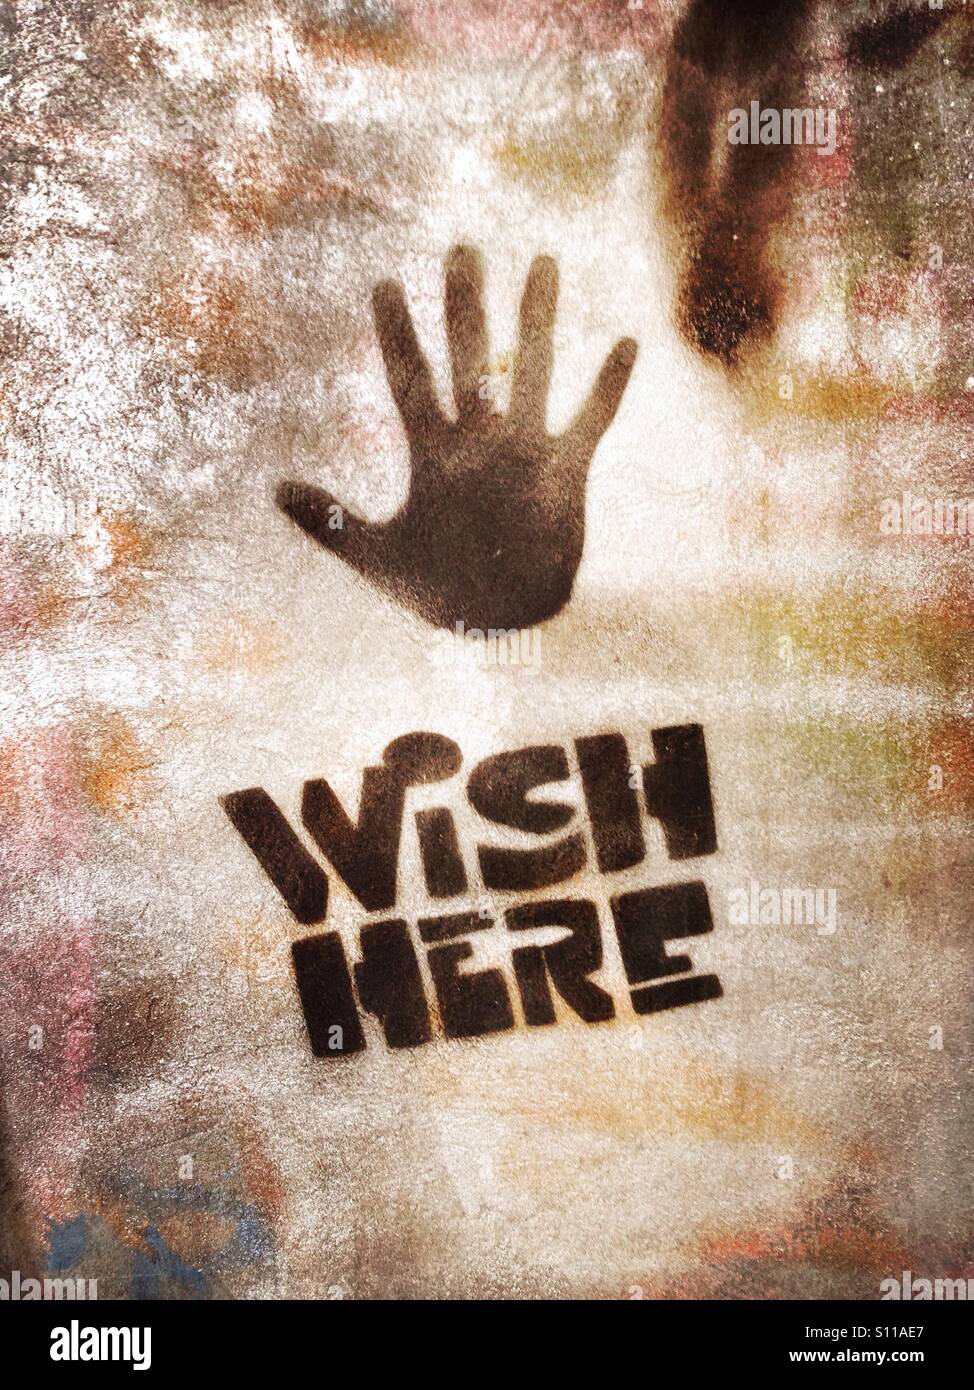 A humorous stencil graffiti on a wall in the Berlin district Kreuzberg saying wish here and showing a hand print Stock Photo